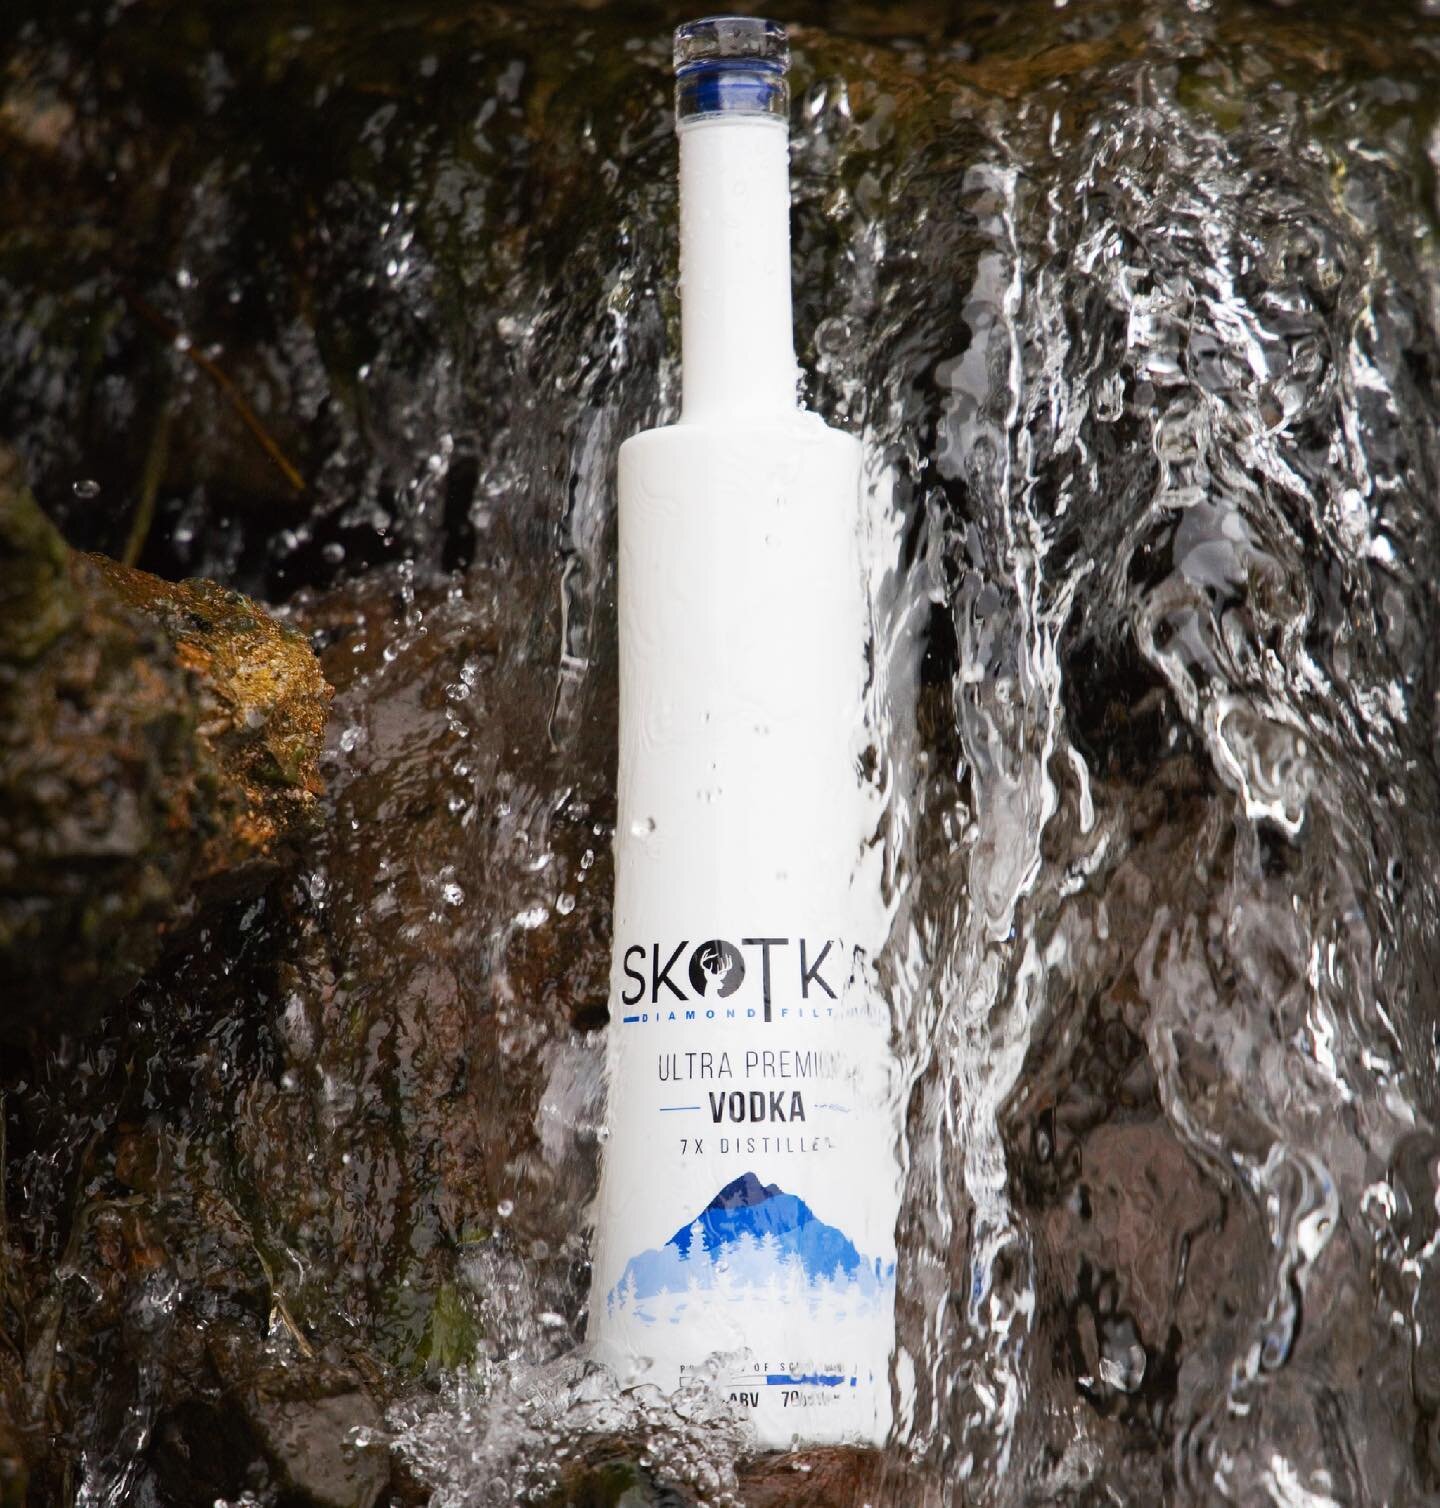 Try something new this weekend.🍸 SKOTKA Vodka is distilled using Scottish water, which ranks alongside the finest in the world for its quality, purity and taste. #upgradeyourvodka #vodka #Scotland #madeinscotland #fridayfeeling #scottish